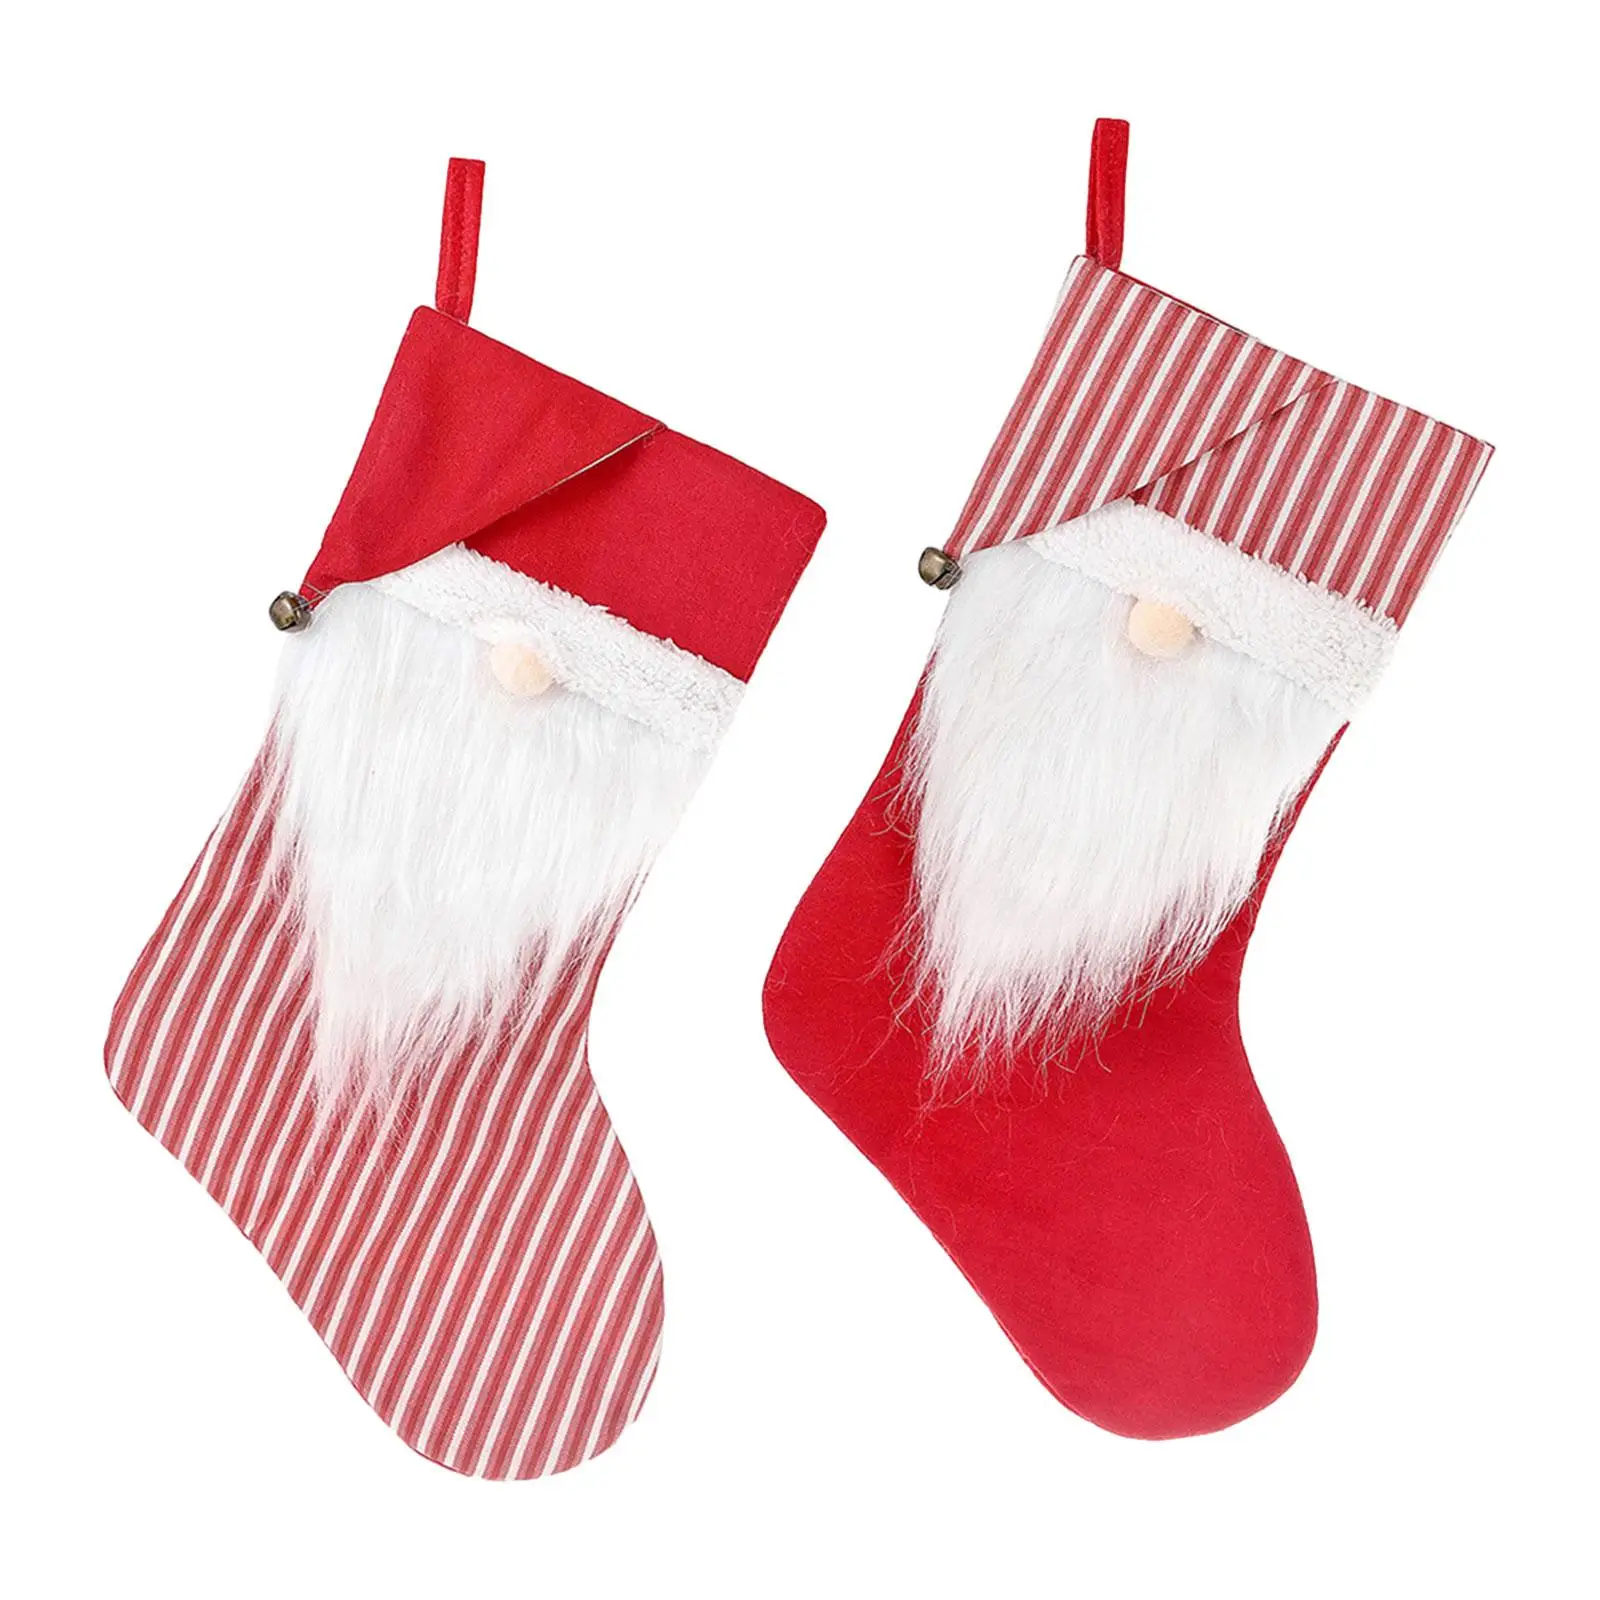 Christmas Stocking Unique Decorative Xmas Hanging Stockings for Kids Bedroom